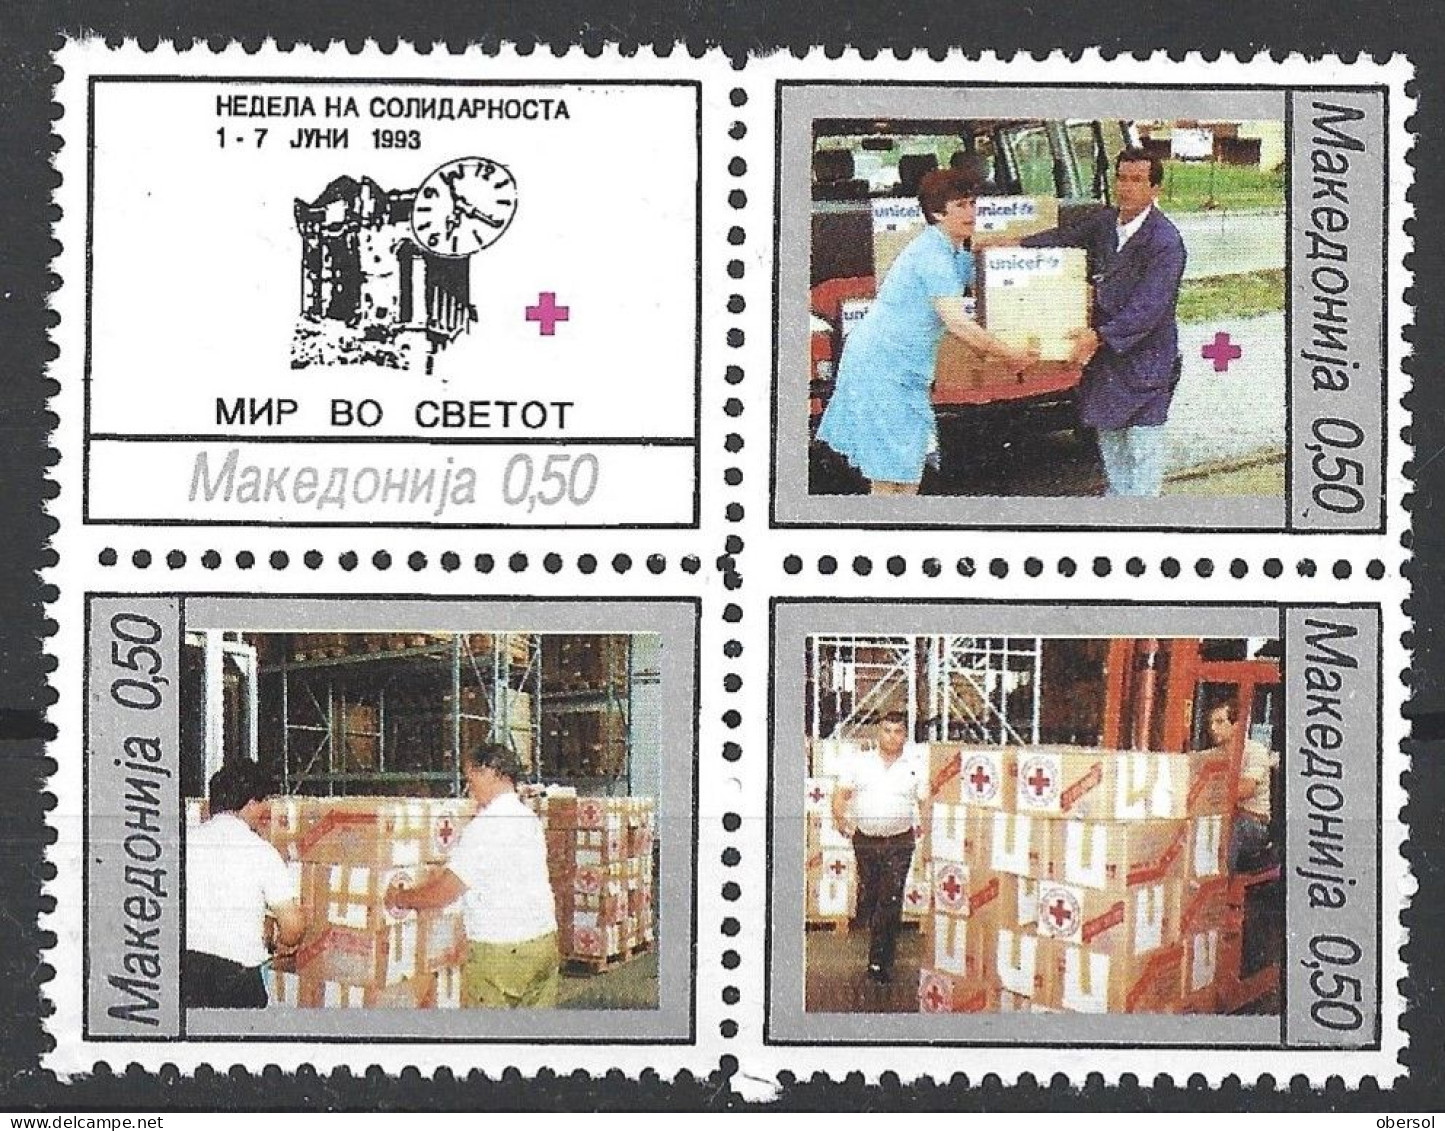 Macedonia 1993 Red Cross Solidarity Complete Block Of Four MNH (2) - Macédoine Du Nord